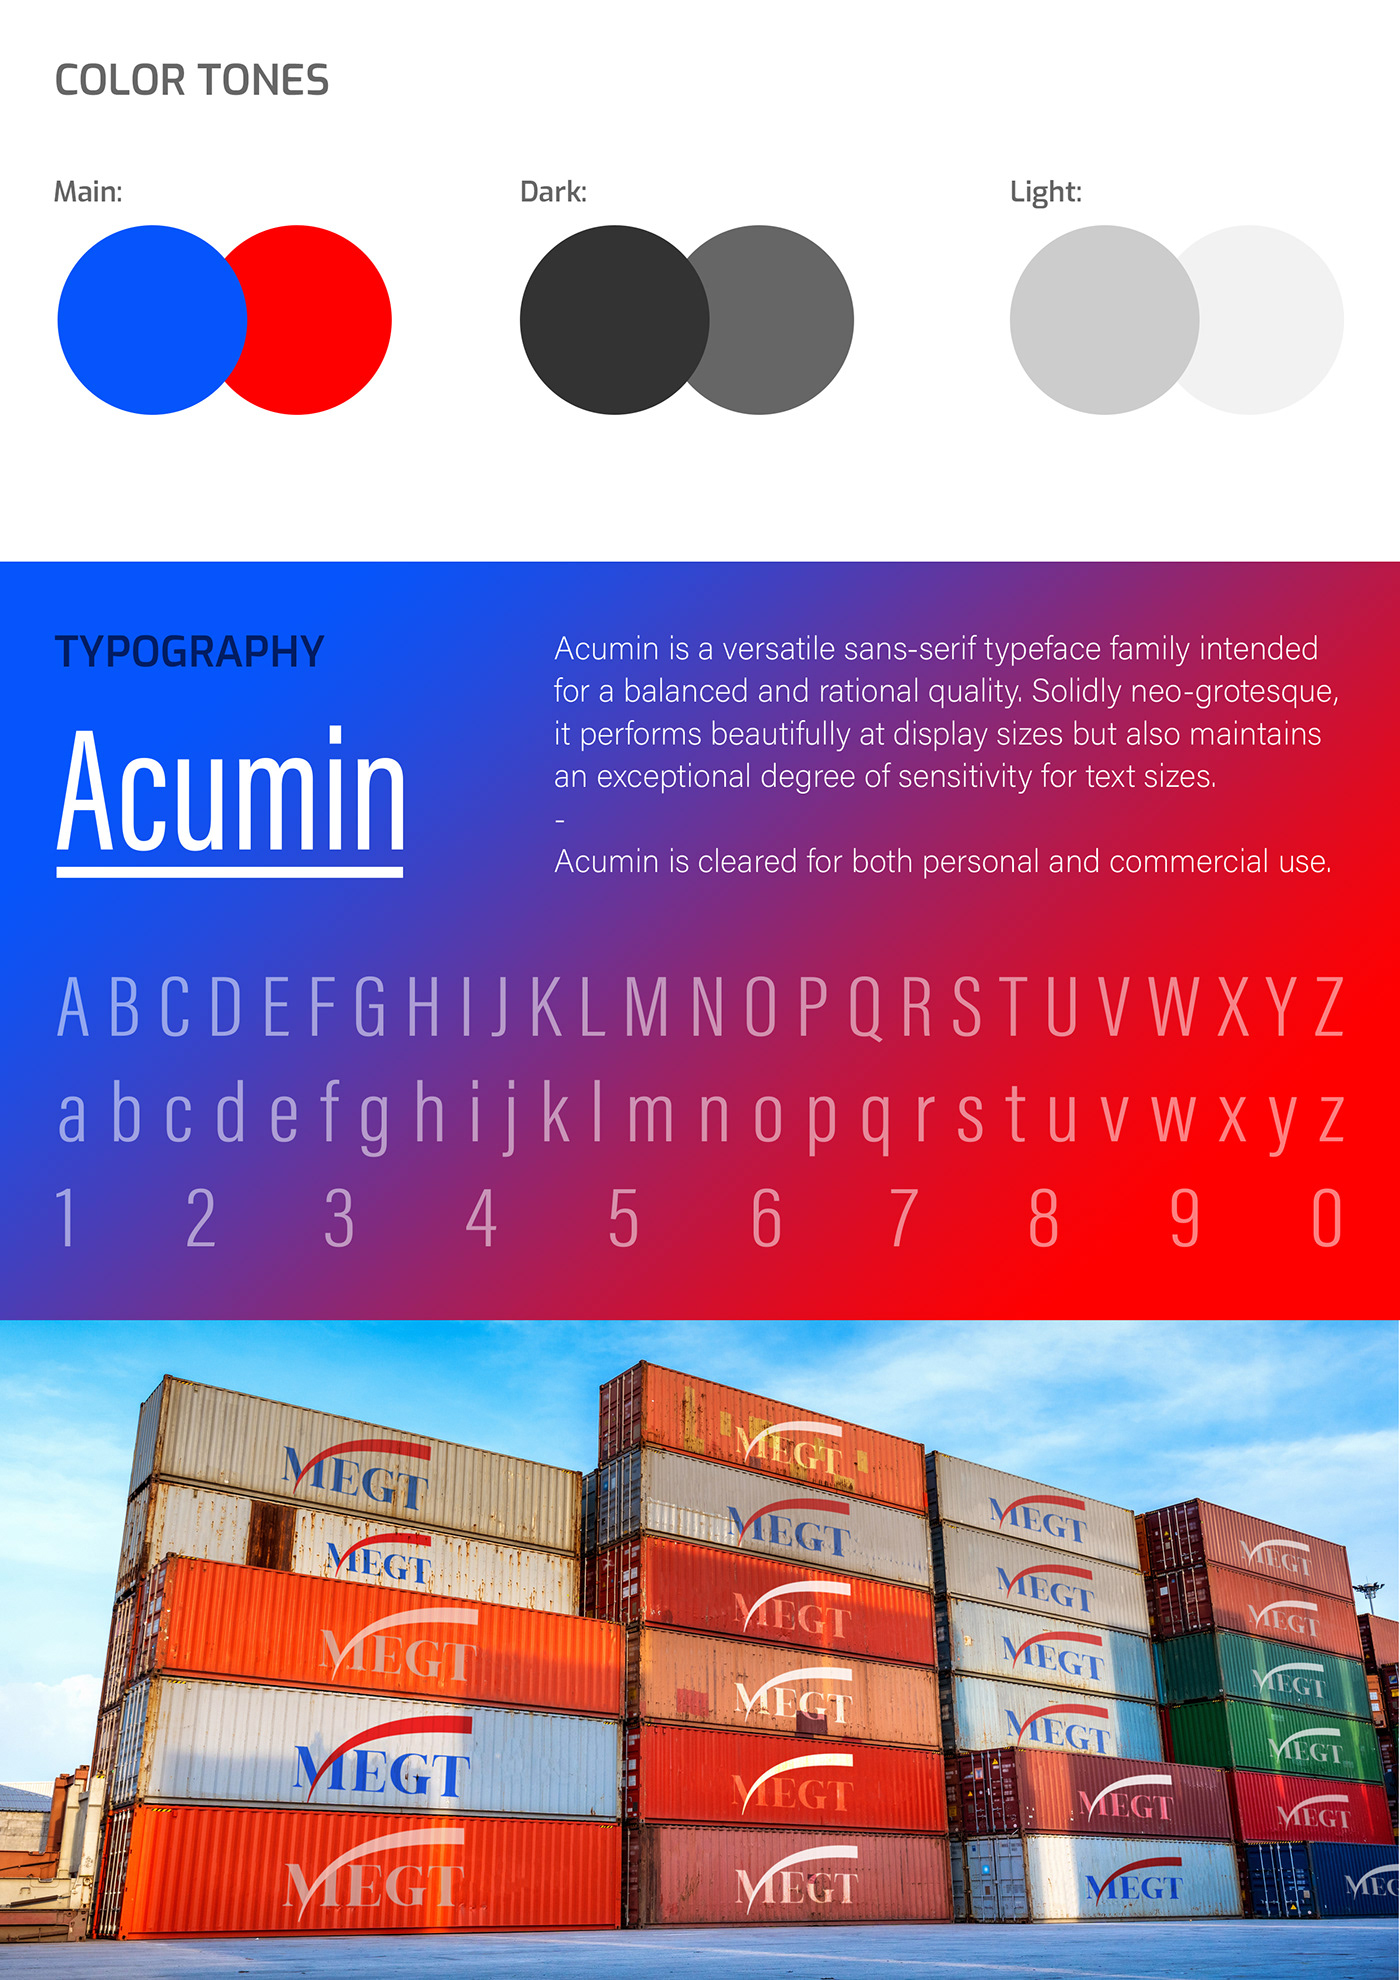 brand identity Branding Identity container MEGT middle east middle east group trans sea ship shipping هوية هوية بصرية